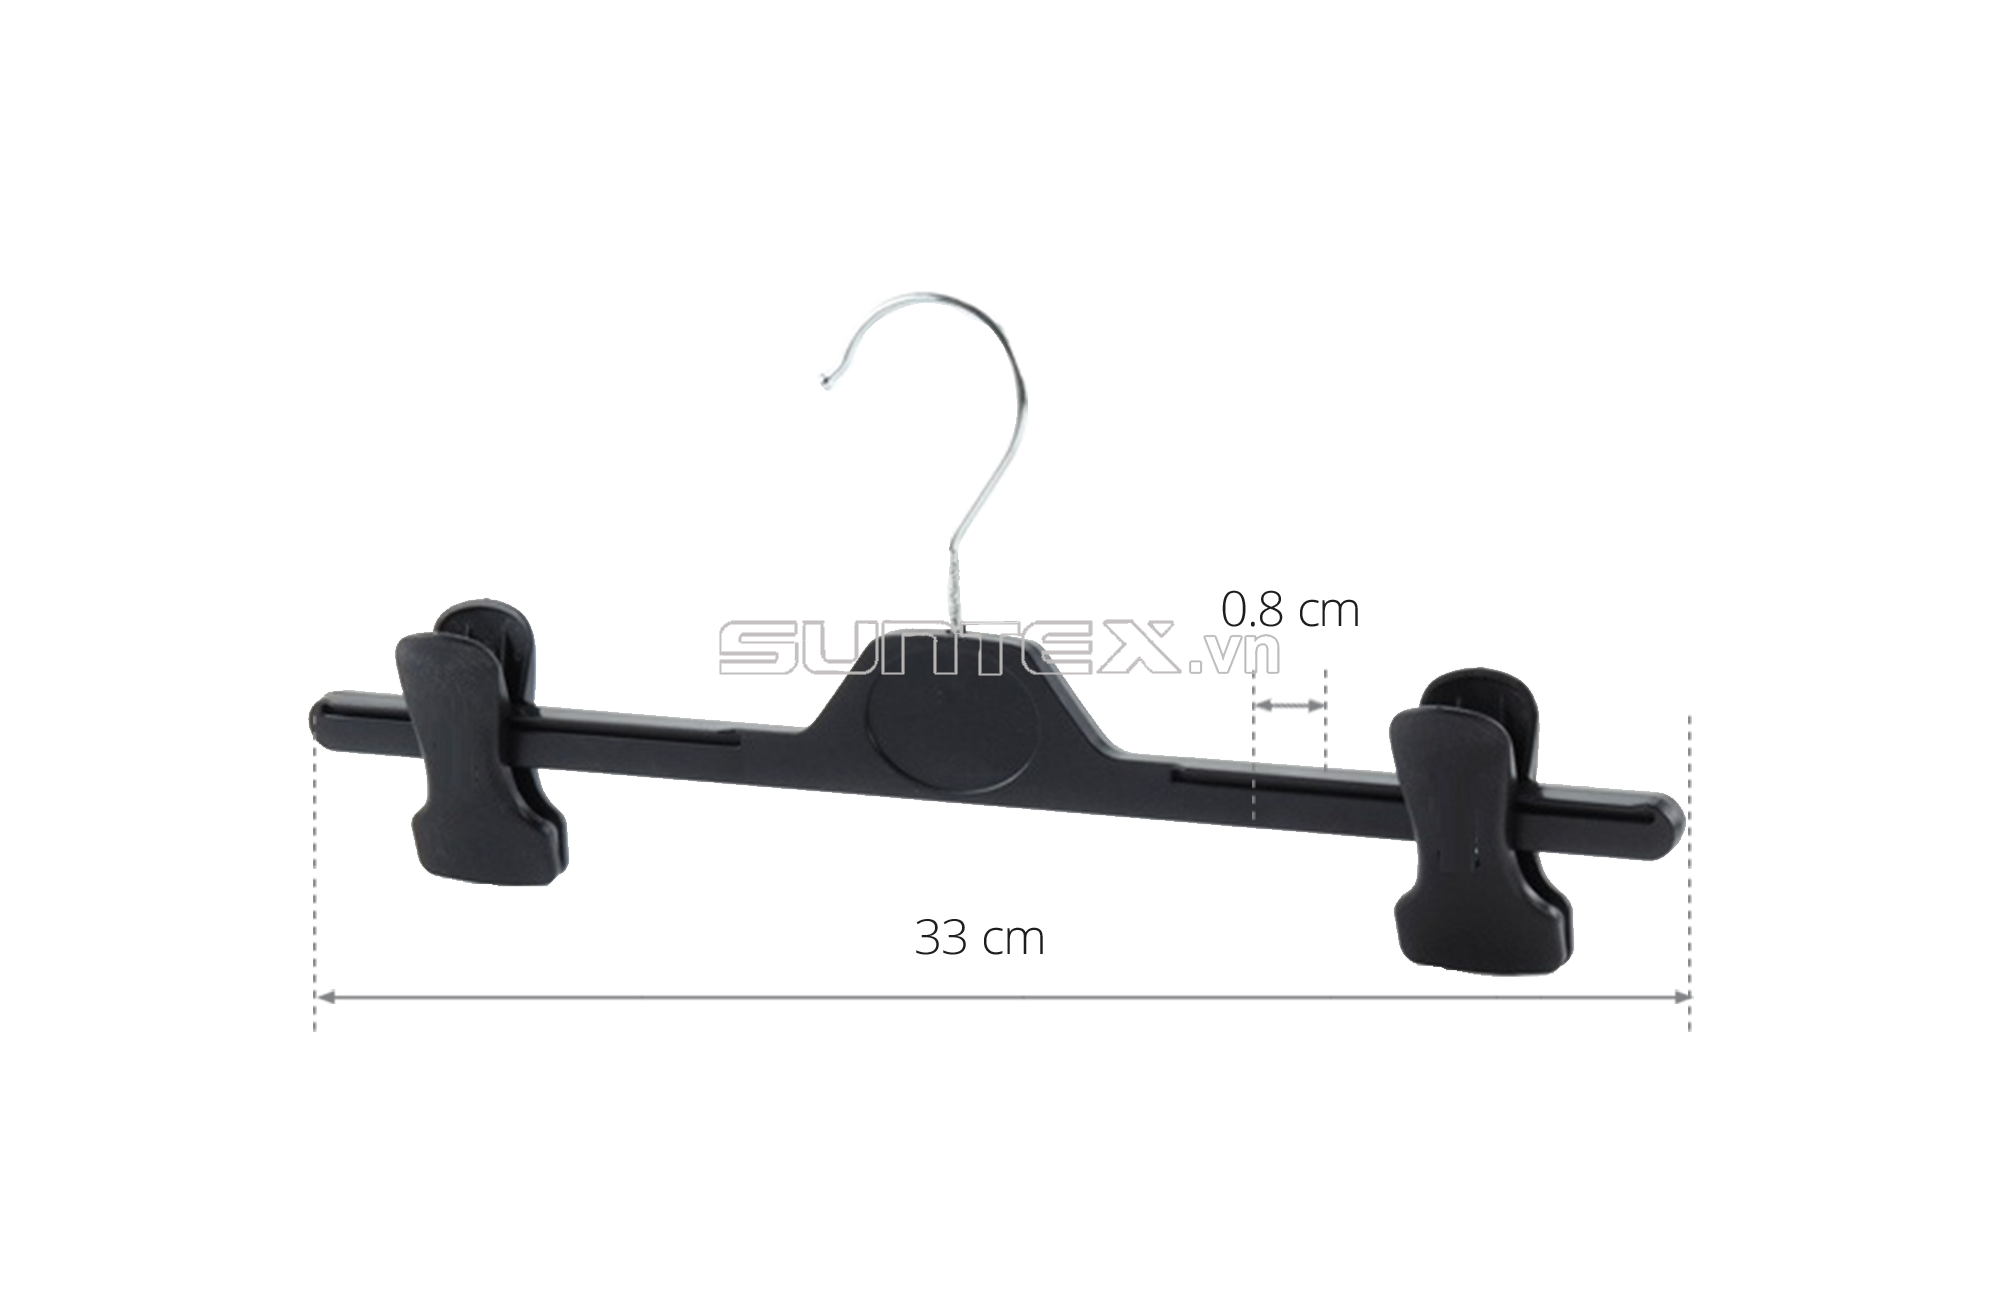 Plastic Hanger Luxury Material Durable Plastic For Clothes 1.2Cm Customized Packaging Vietnam Manufacturer 1